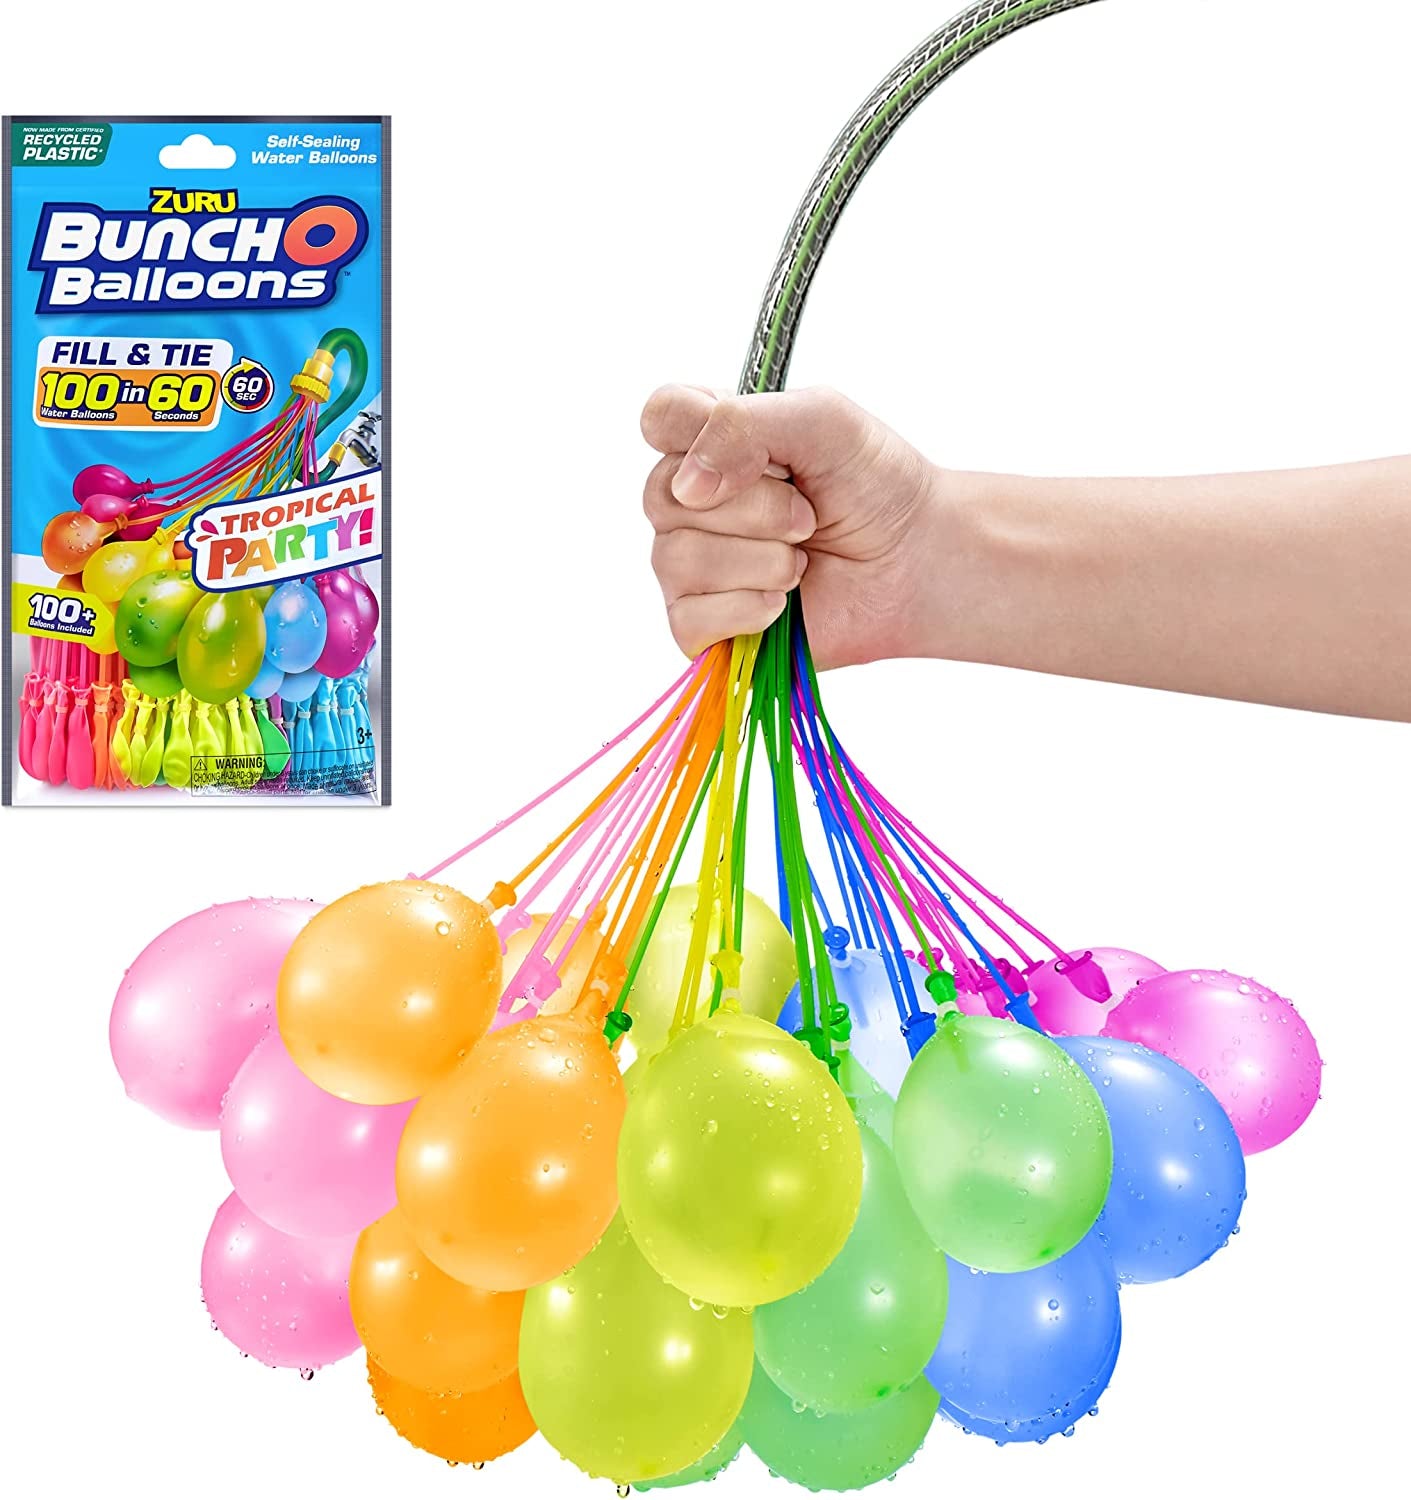 Tropical Party (3 Pack) by , 100+ Rapid-Filling Self-Sealing Tropical Colored Water Balloons for Outdoor Family, Friends, Children Summer Fun (3 Pack)